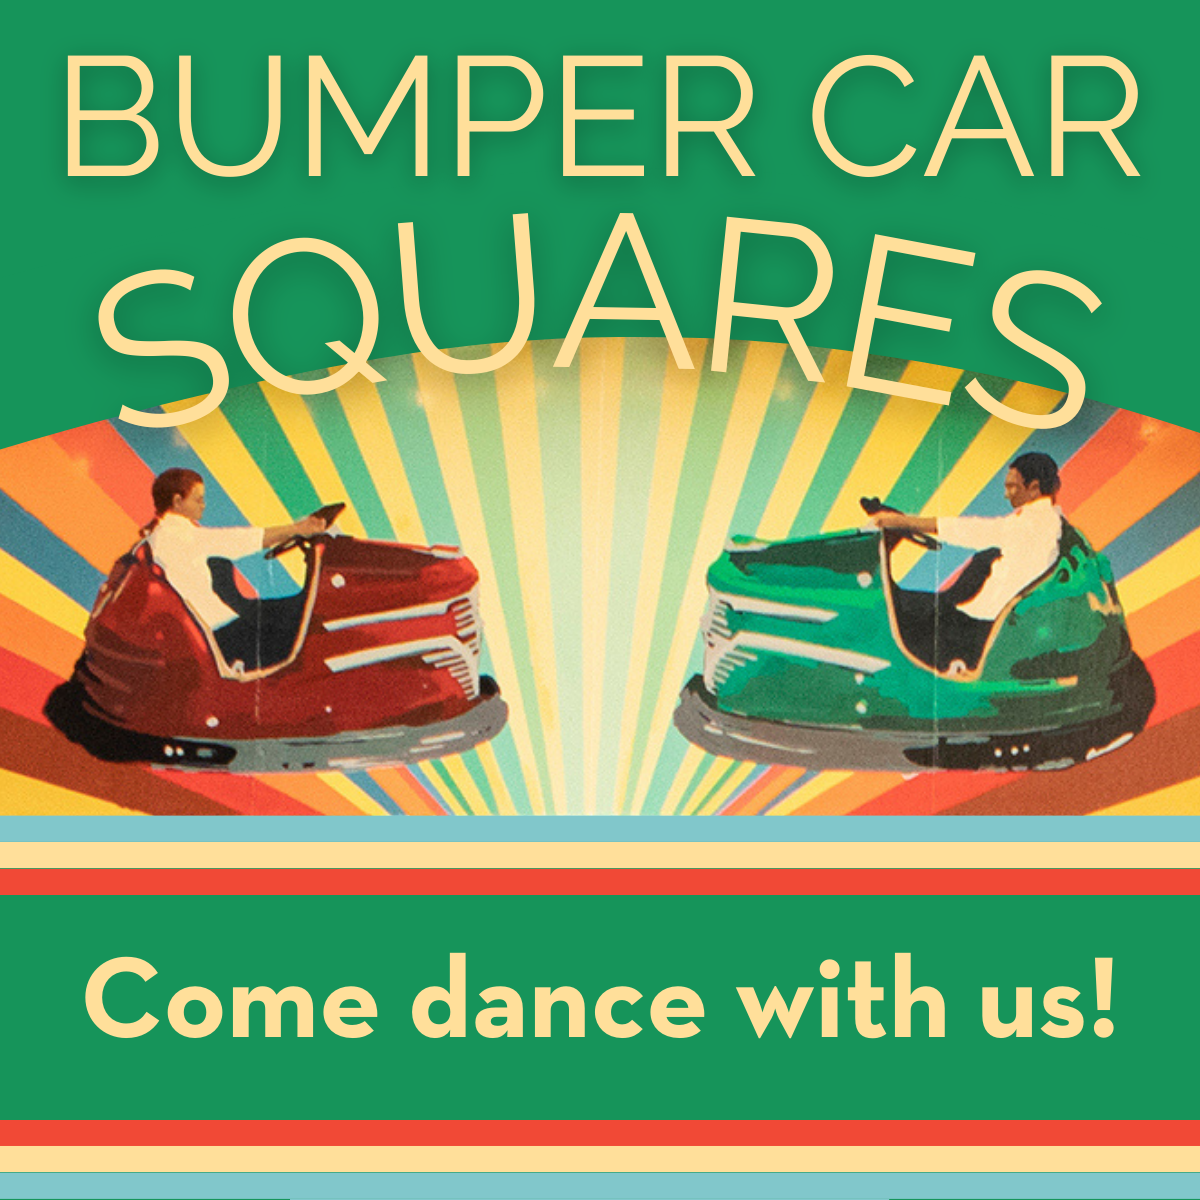 Bumper car mural with text reading "Bumper Car Squares" and "Come dance with us!"